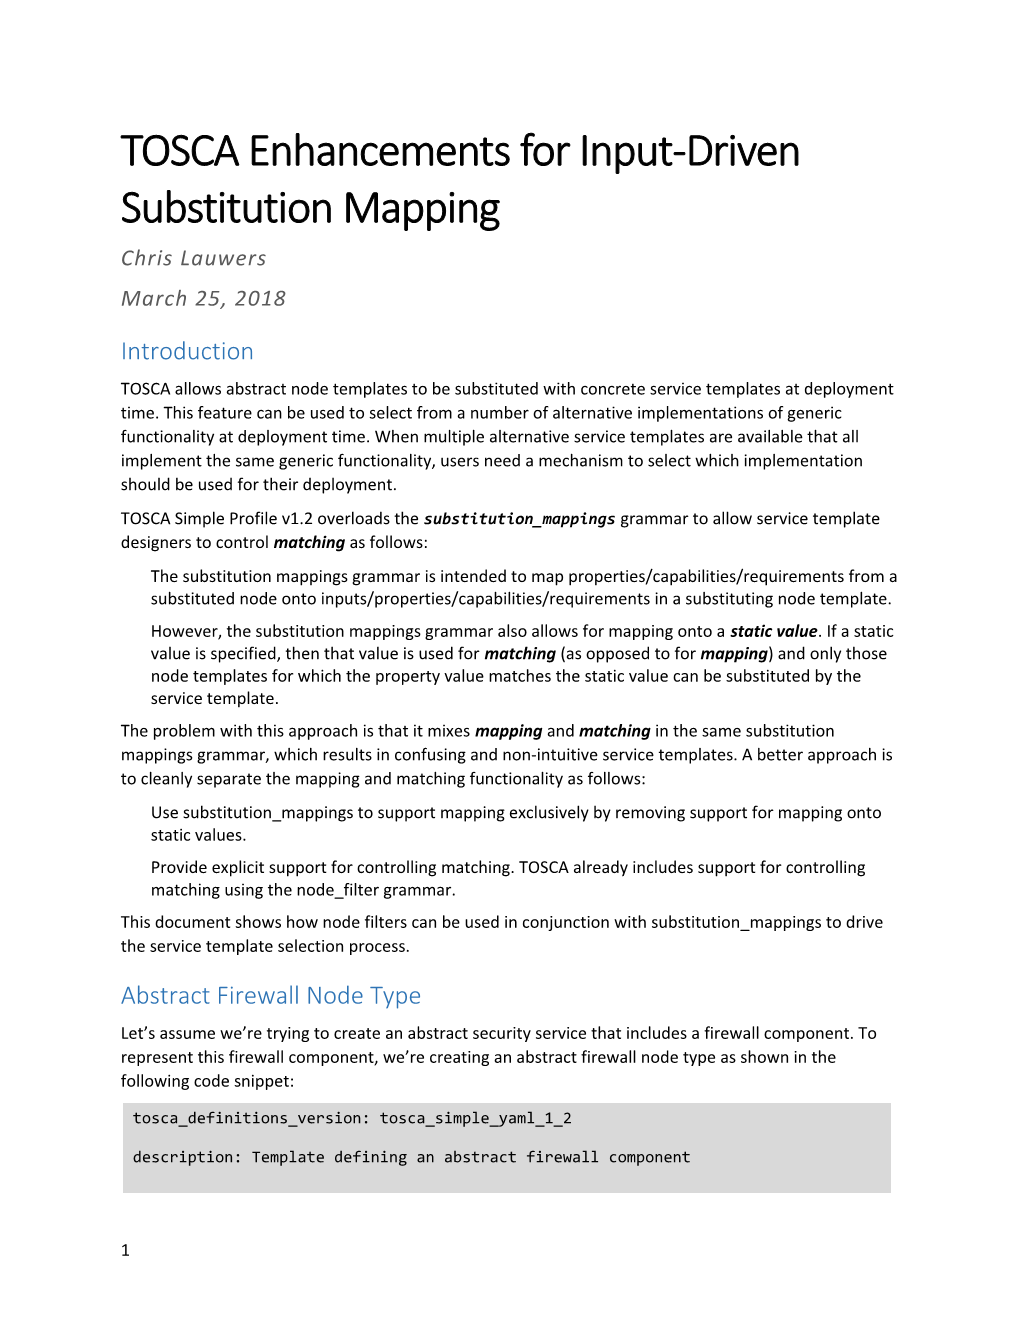 TOSCA Enhancements for Input-Drivensubstitution Mapping